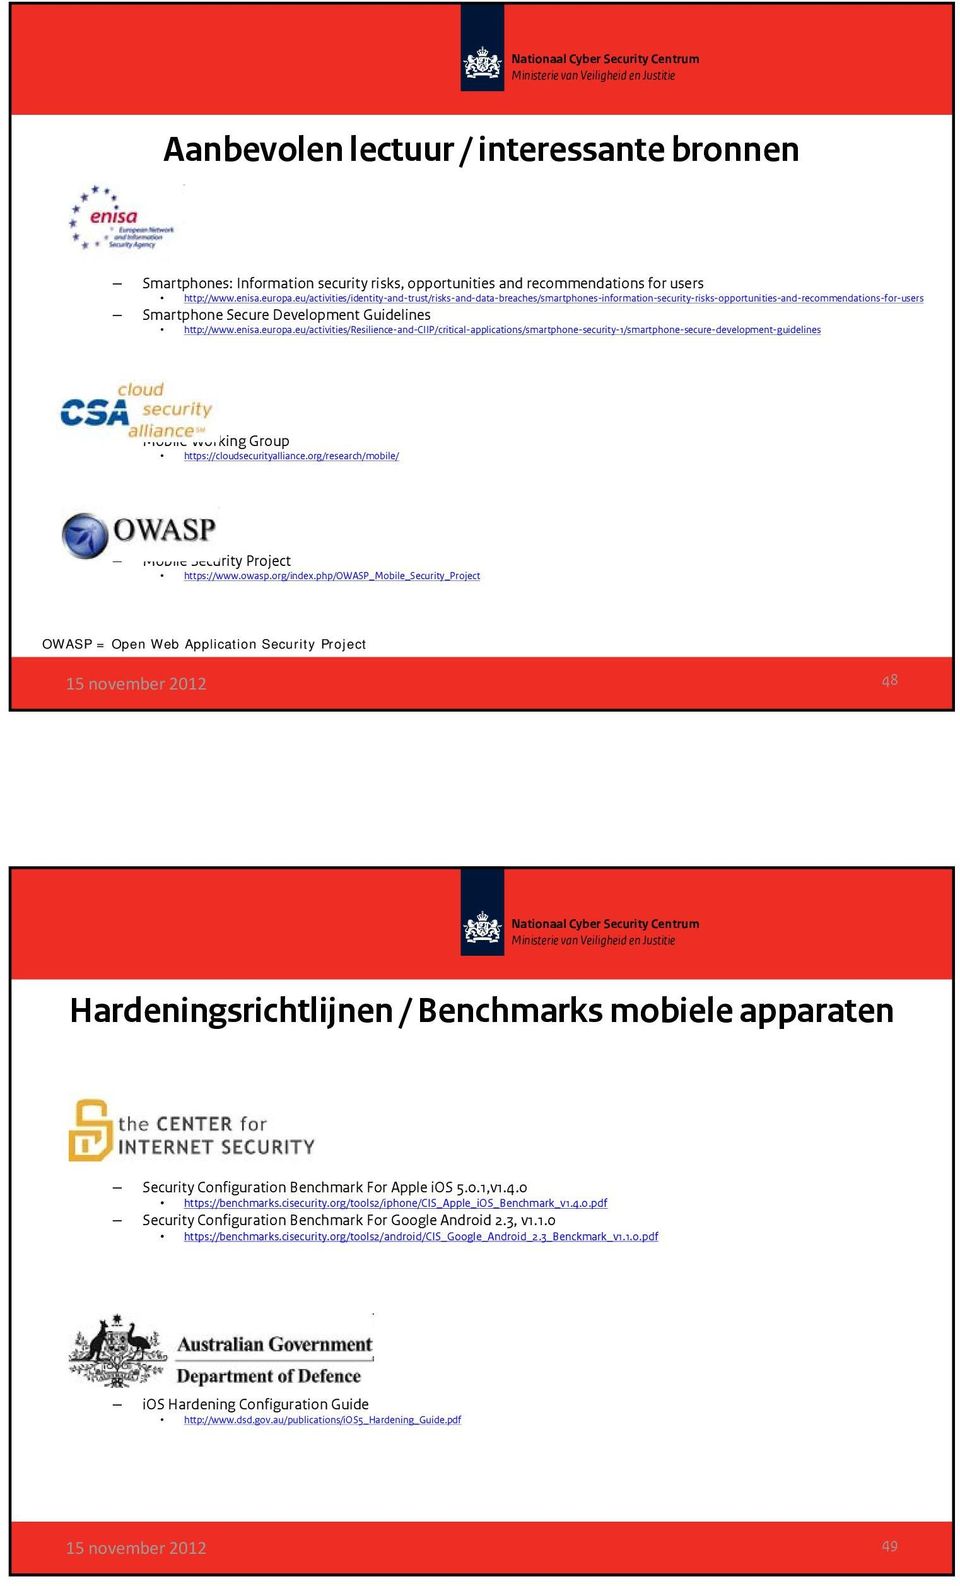 europa.eu/activities/resilience-and-ciip/critical-applications/smartphone-security-1/smartphone-secure-development-guidelines Mobile Working Group https://cloudsecurityalliance.